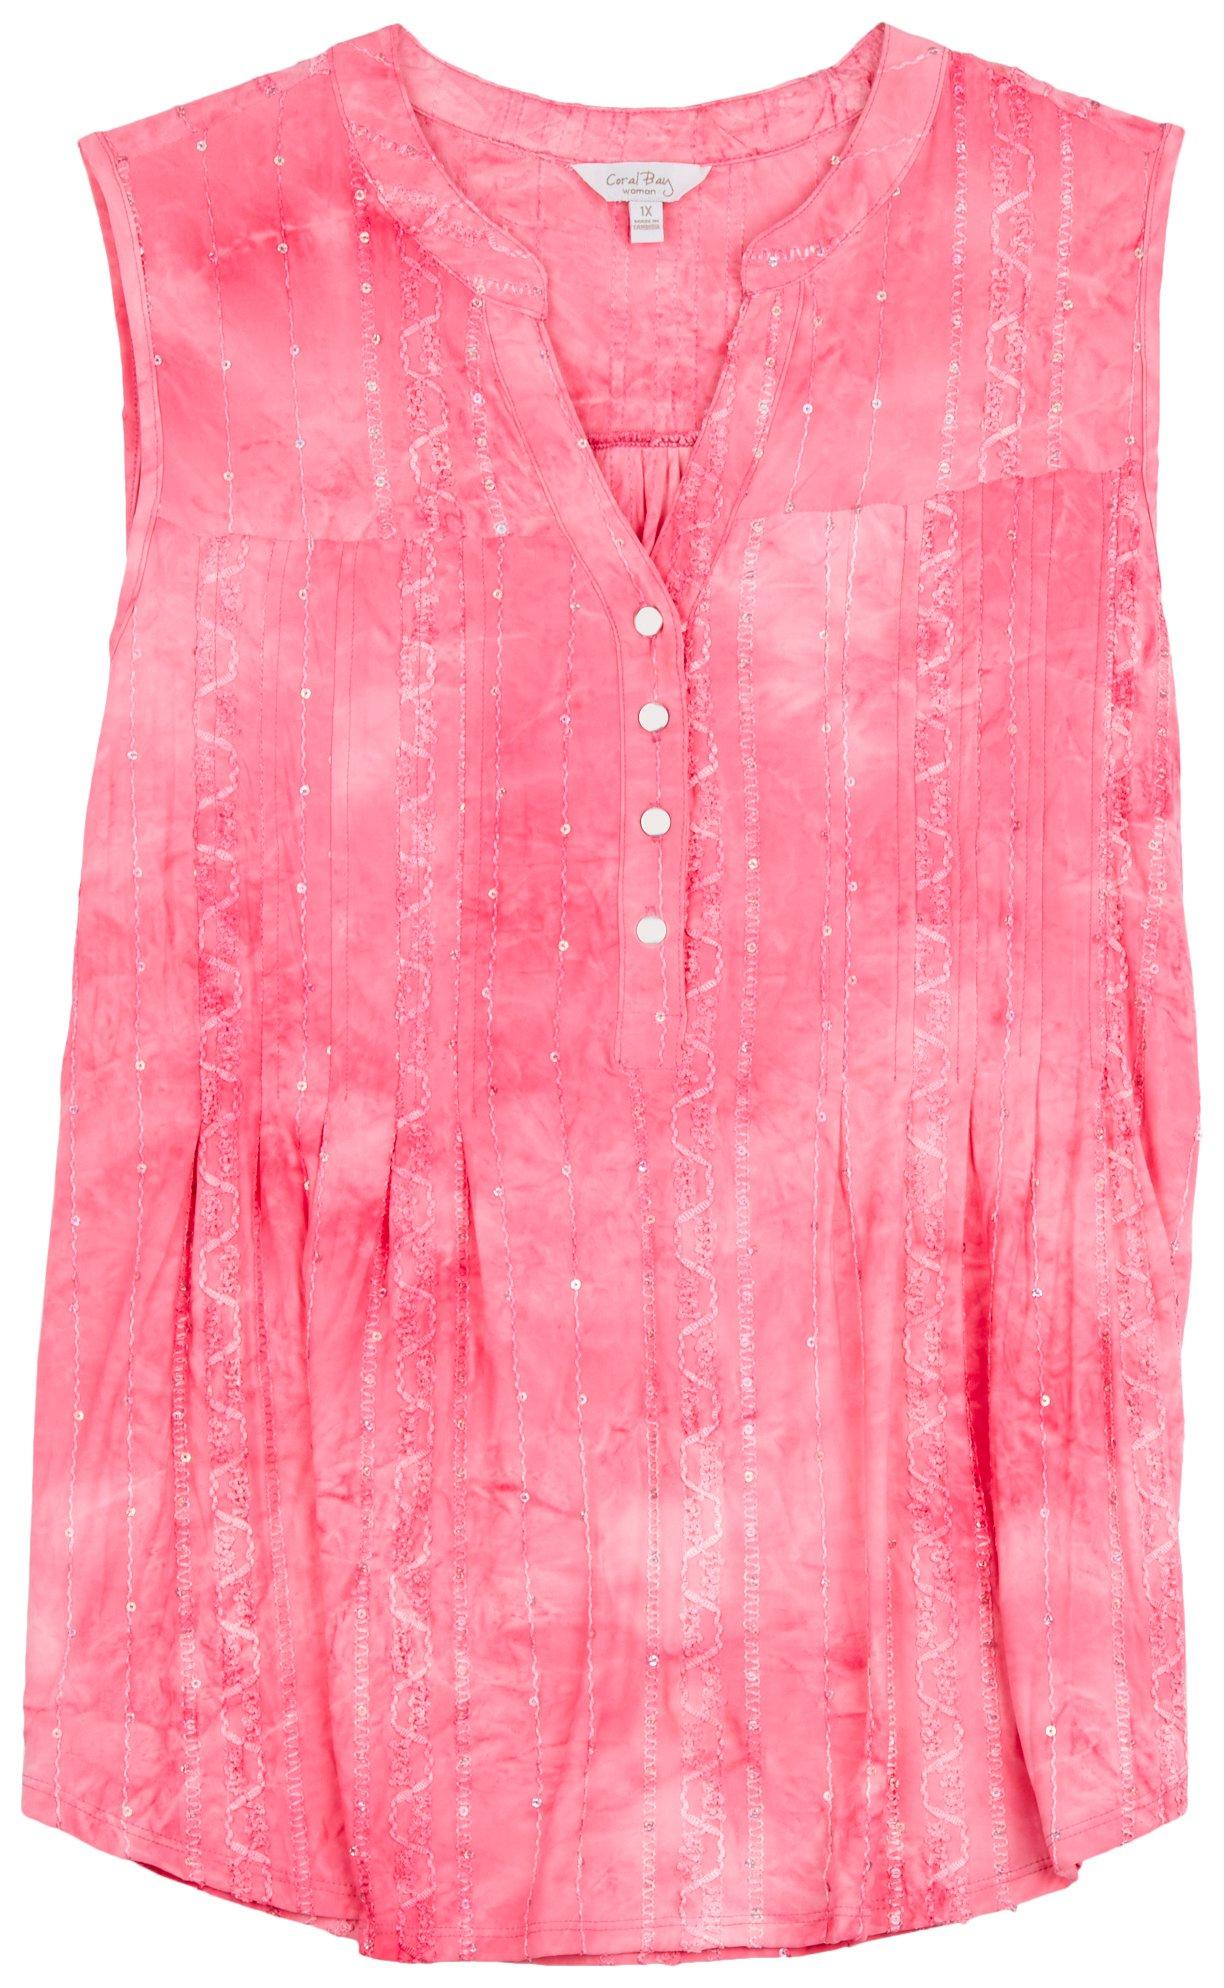 Coral Bay Plus Pleated Sleeveless Top